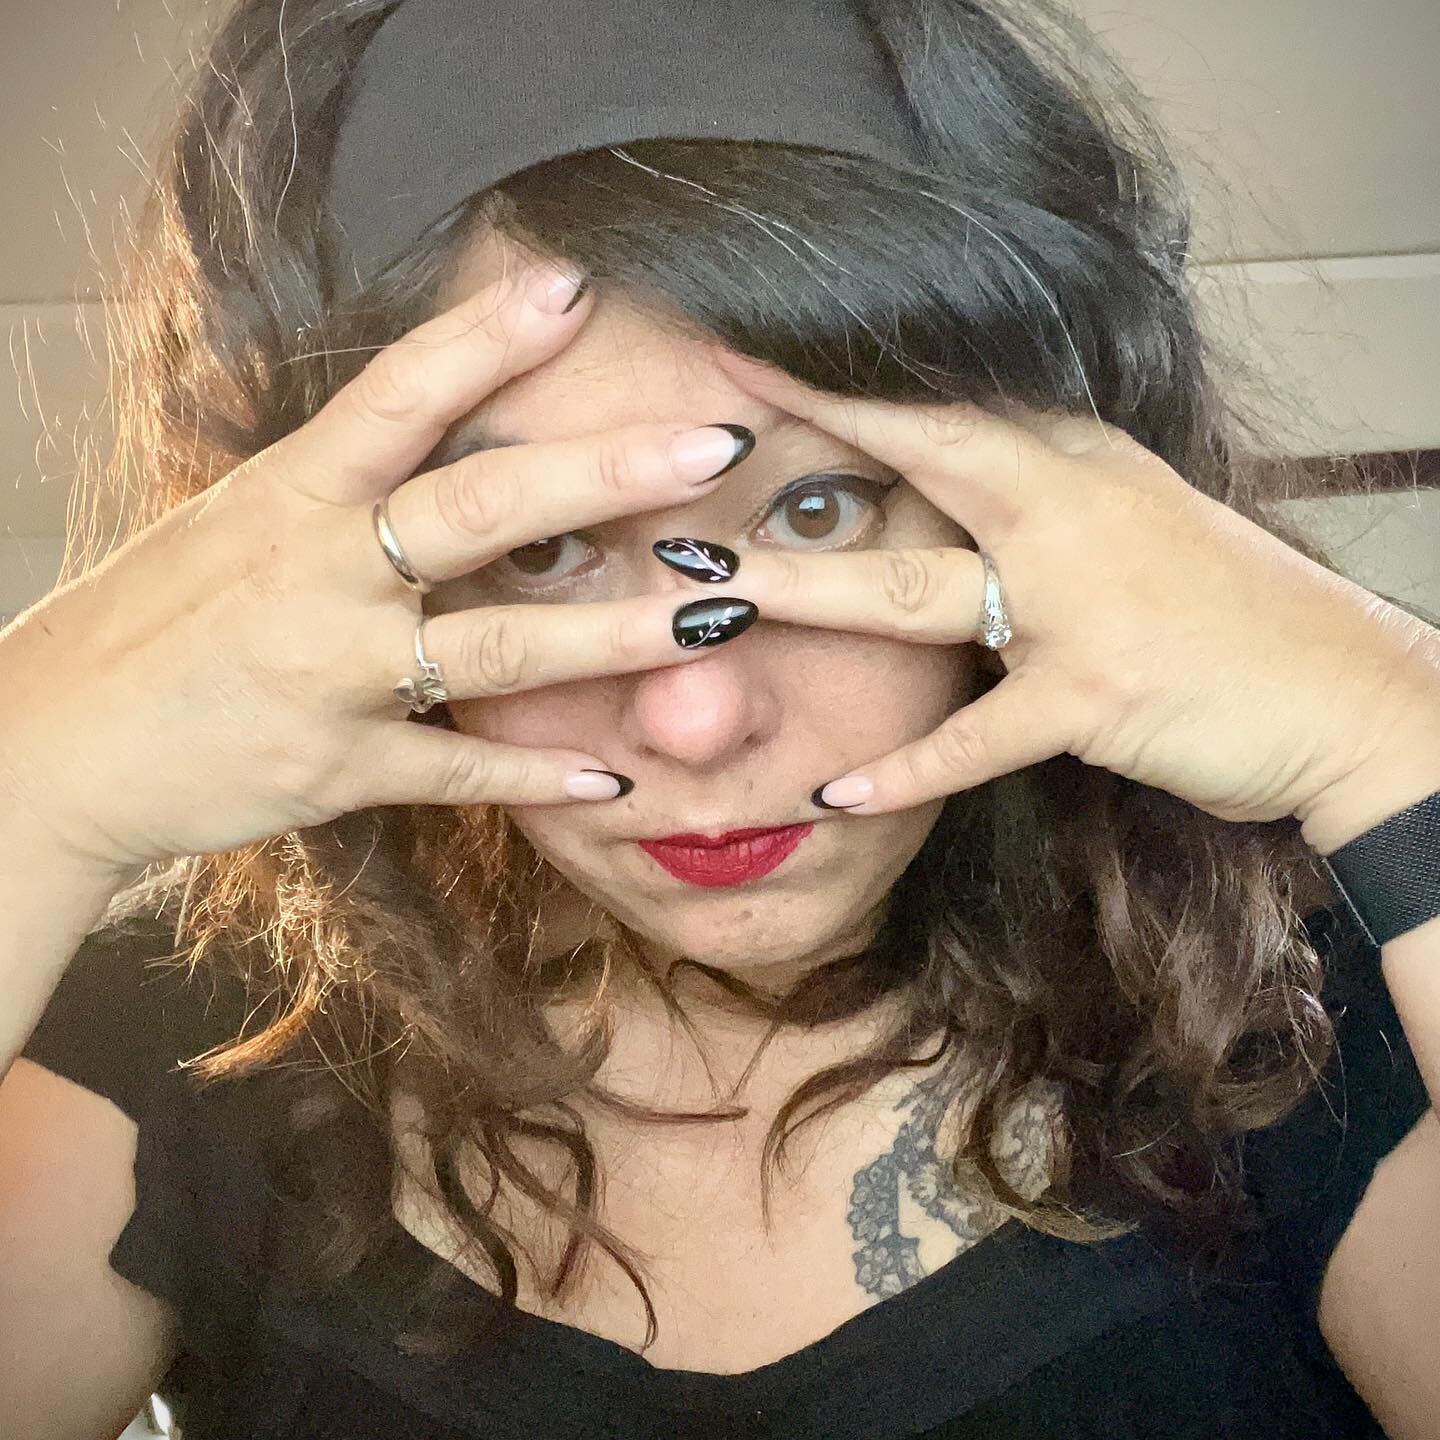 What an exhausting week. At least my claws were done. Thanks @attila.nailsss for always giving me a break. #ladyjrva #milatinas #fabinails #nailart #puttingthesweetunhome